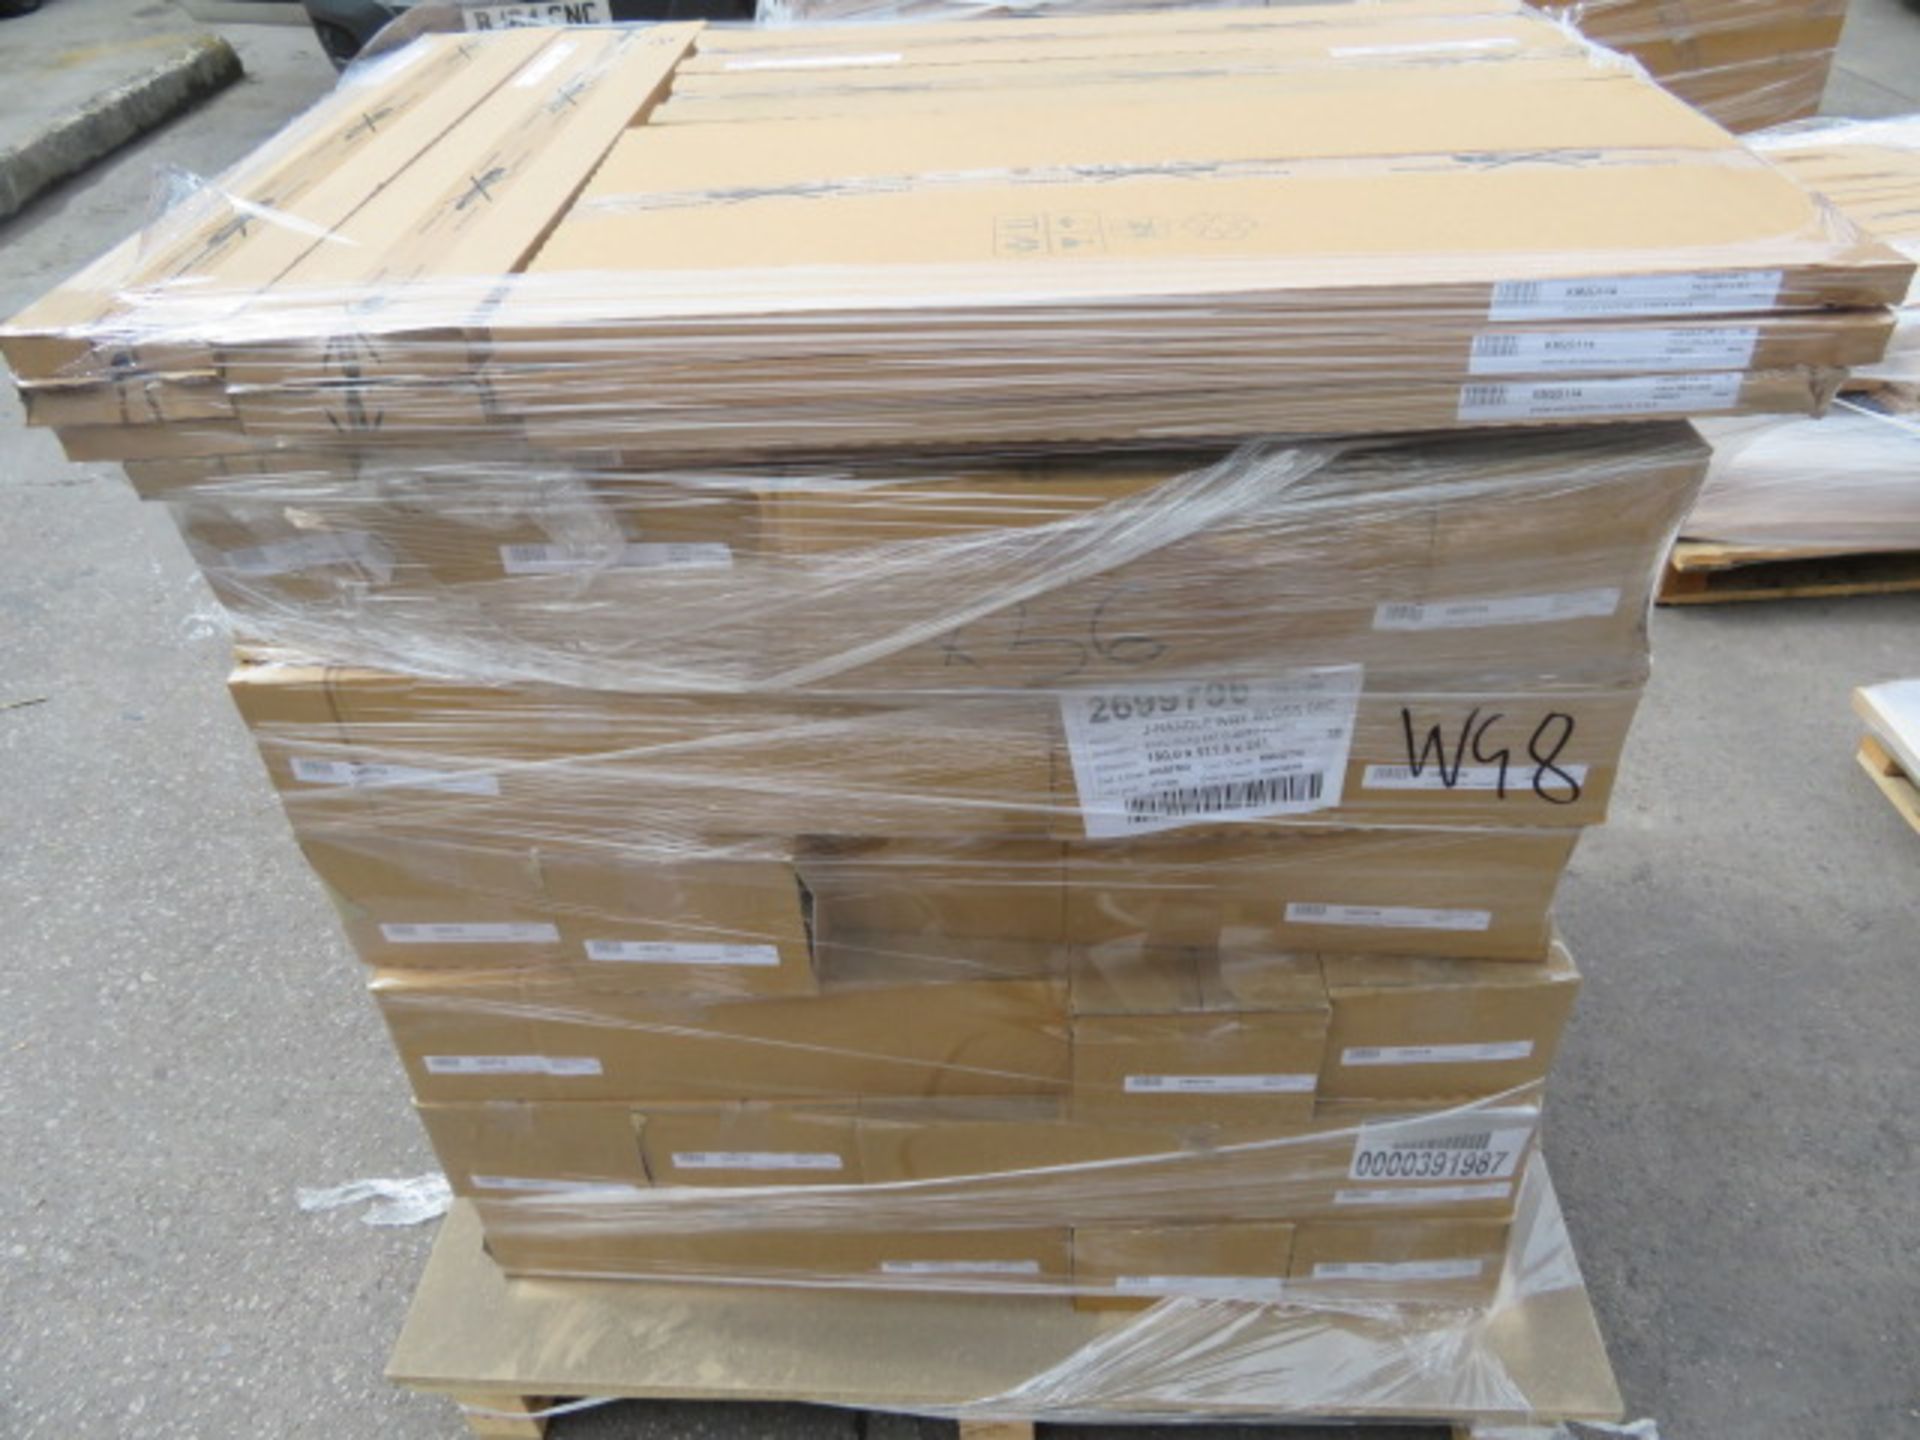 (WG8) Pallet To Contain 50 Items Of New Kitchen Stock. To Include: IVORY GLOSS Etc. Huge Profi...